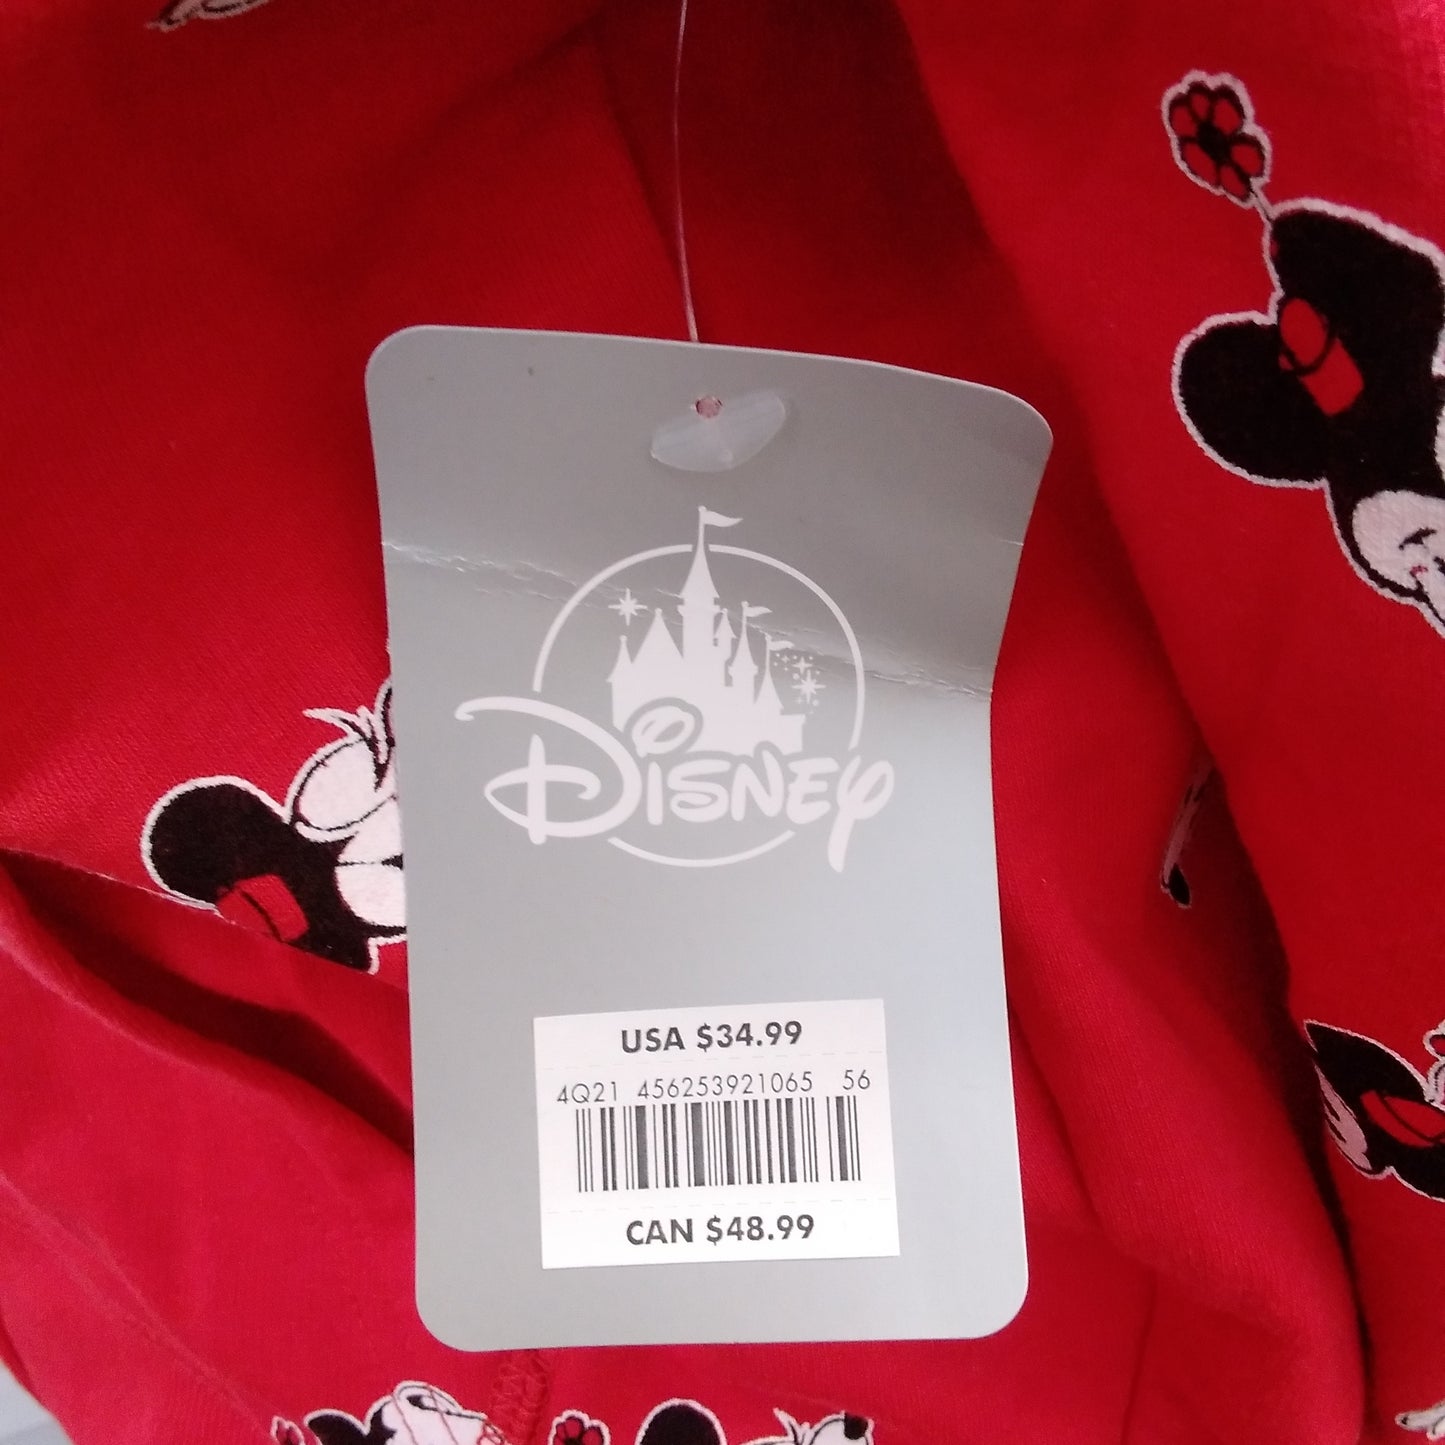 NWT - Disney Minnie Mouse Red Zip-Up Hooded Jacket - Size XS